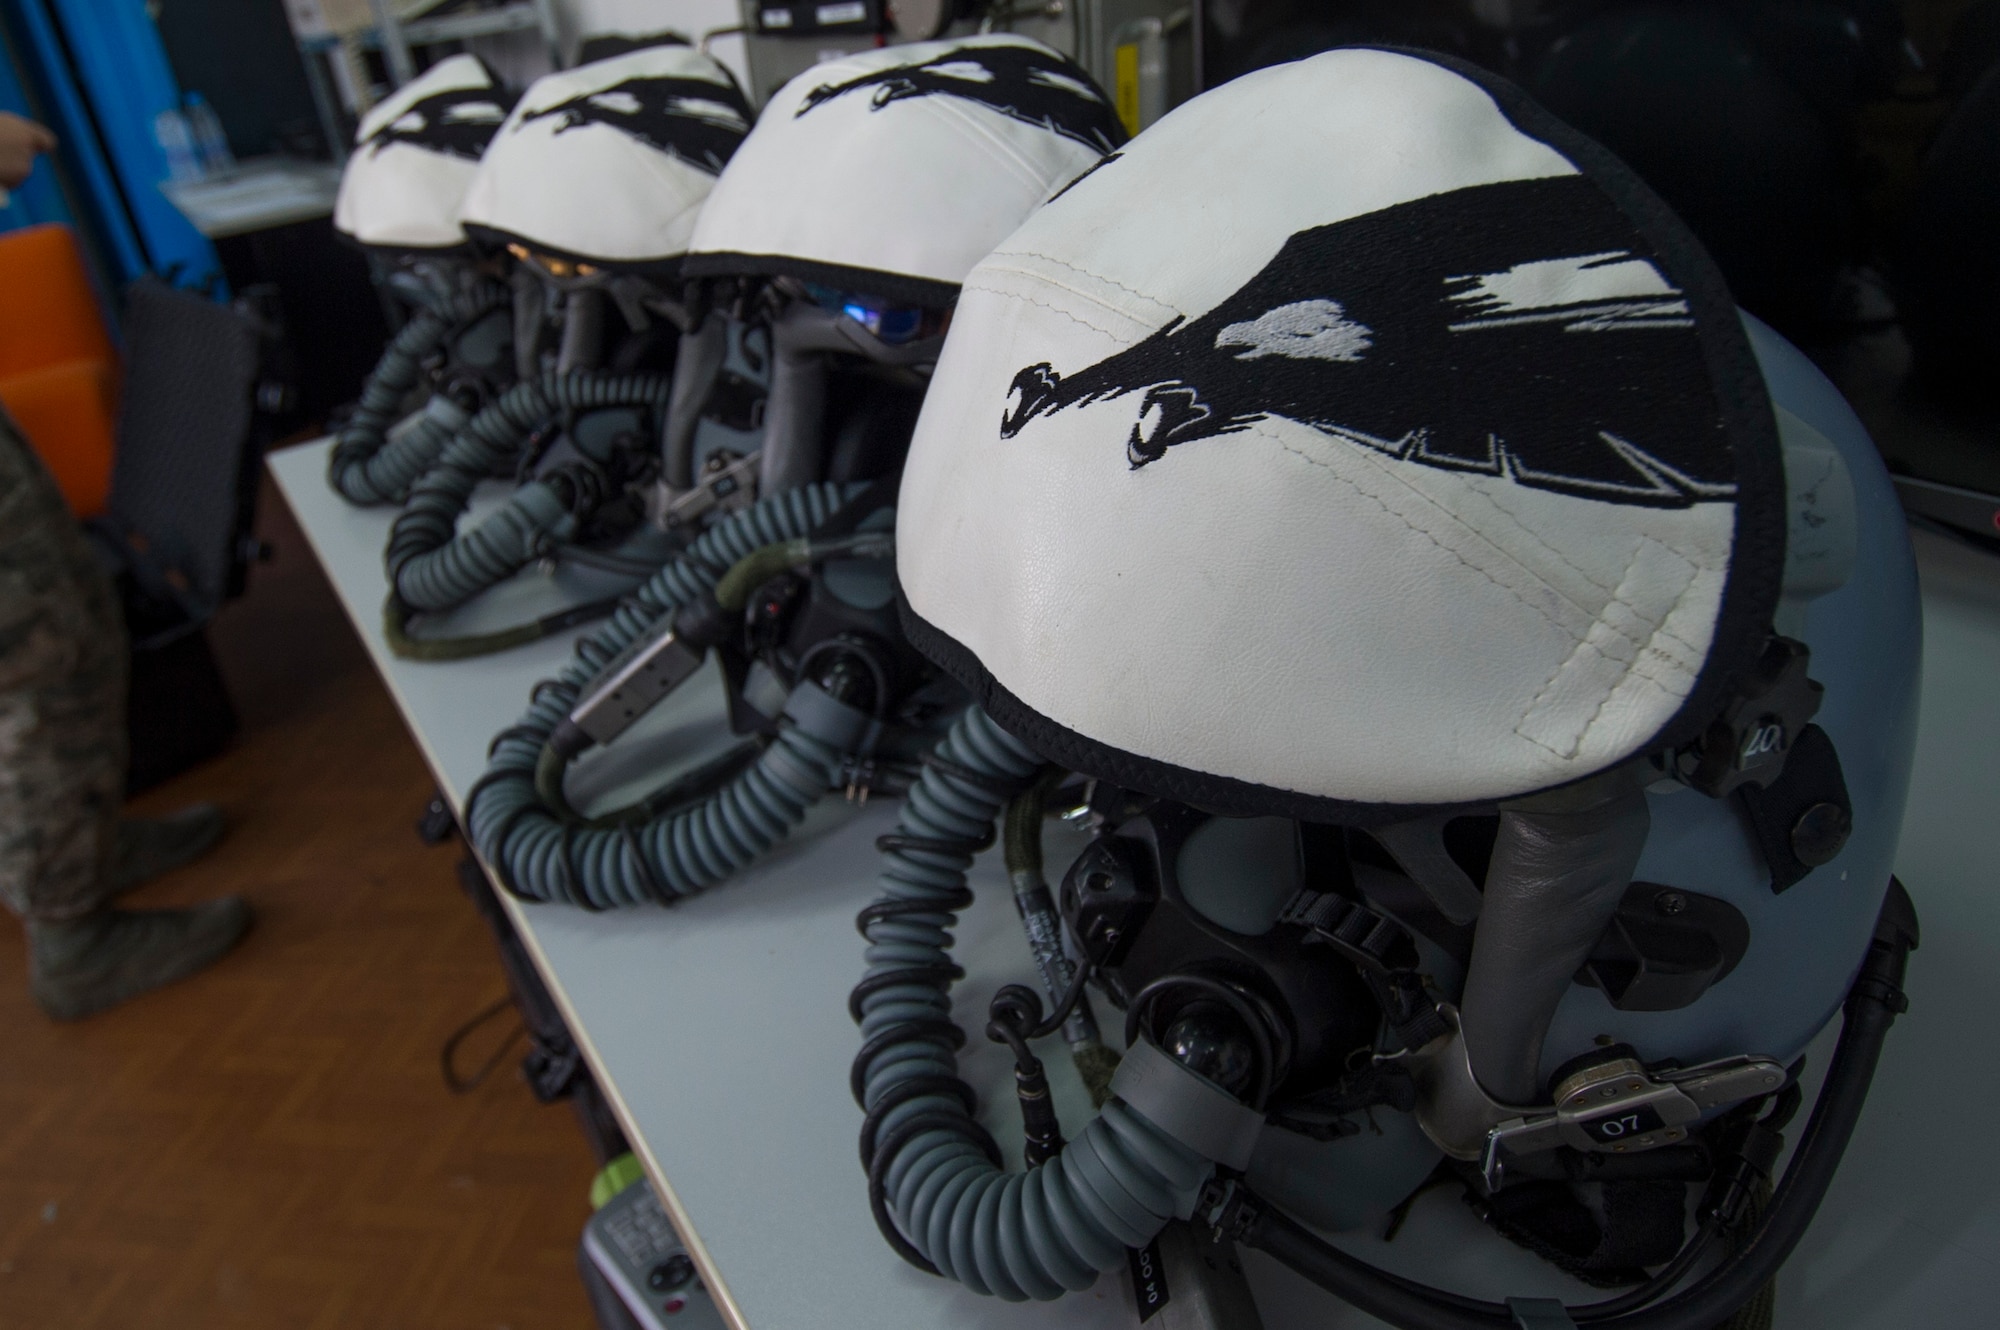 A collection of helmets belonging to California Air National Guard F-15C Eagle fighter aircraft pilots remain on a table at the 194th Expeditionary Fighter Squadron’s flight operations room at Graf Ignatievo, Bulgaria, Sept. 8, 2016. Four of the squadron’s F-15Cs will conduct joint NATO air policing missions with the Bulgarian air force to police the host nation’s sovereign airspace Sept. 9-16, 2016. The squadron forward deployed to Graf Ignatievo from Campia Turzii, Romania, where they serve on a theater security package deployment to Europe as a part of Operation Atlantic Resolve. (U.S. Air Force photo by Staff Sgt. Joe W. McFadden) 